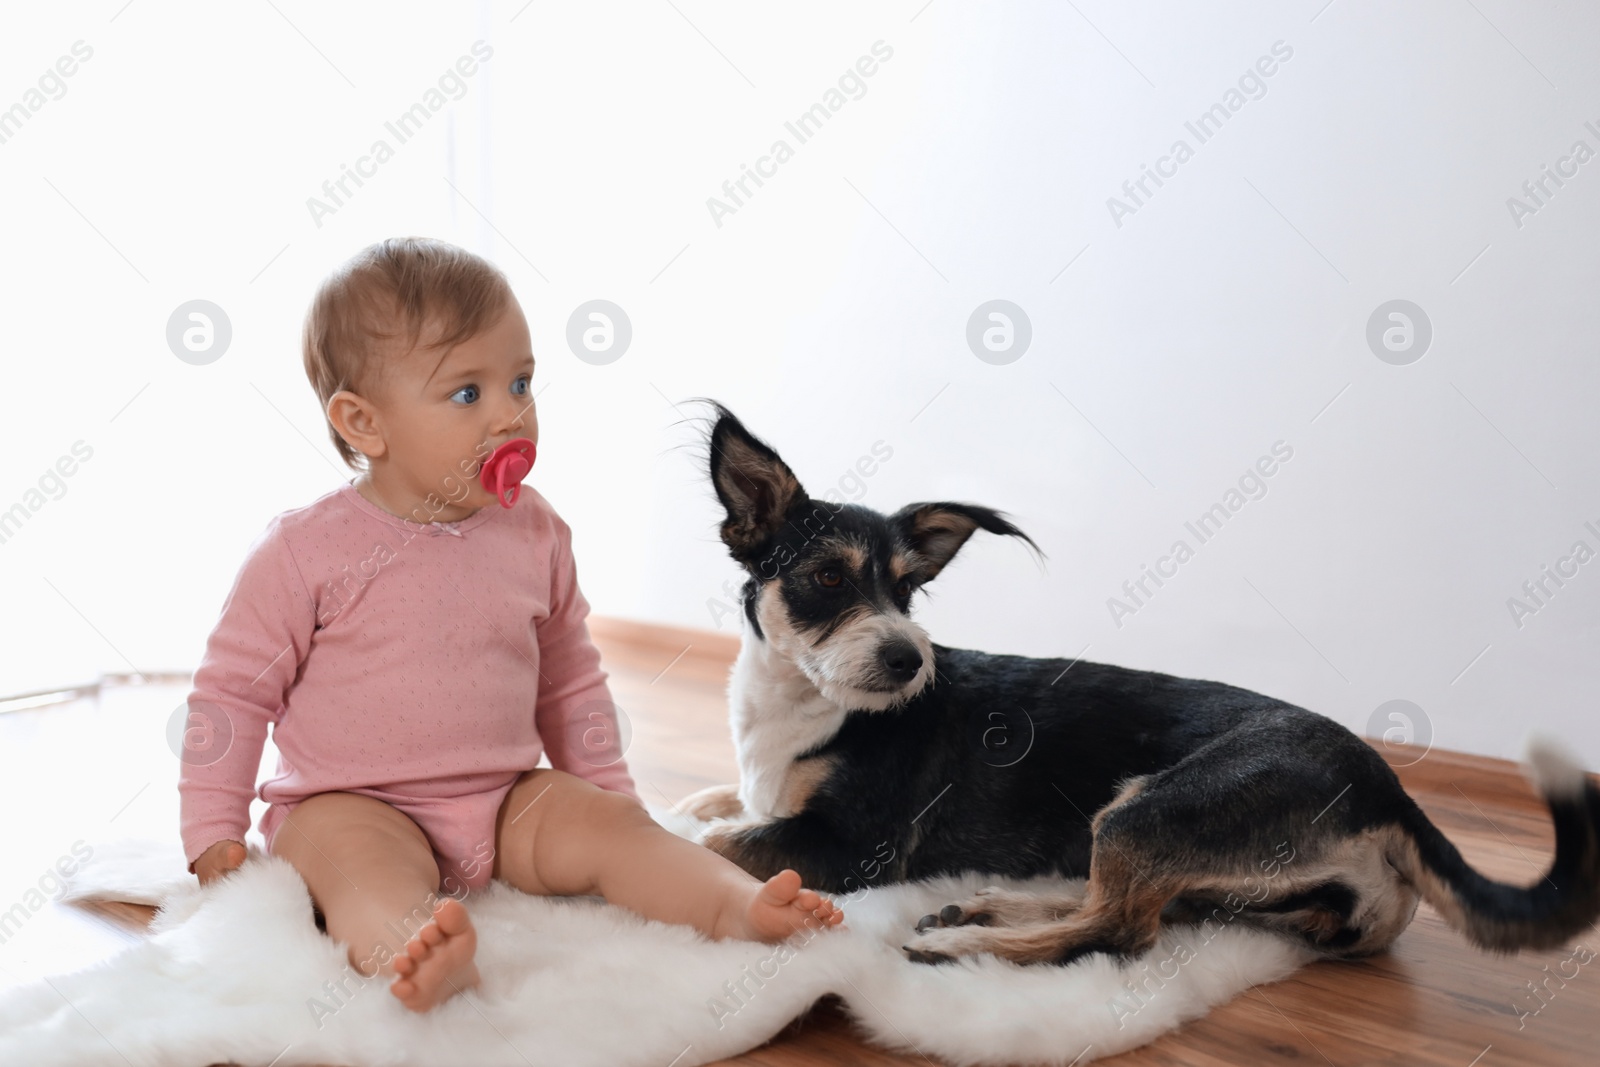 Photo of Adorable baby with pacifier and cute dog on faux fur rug indoors